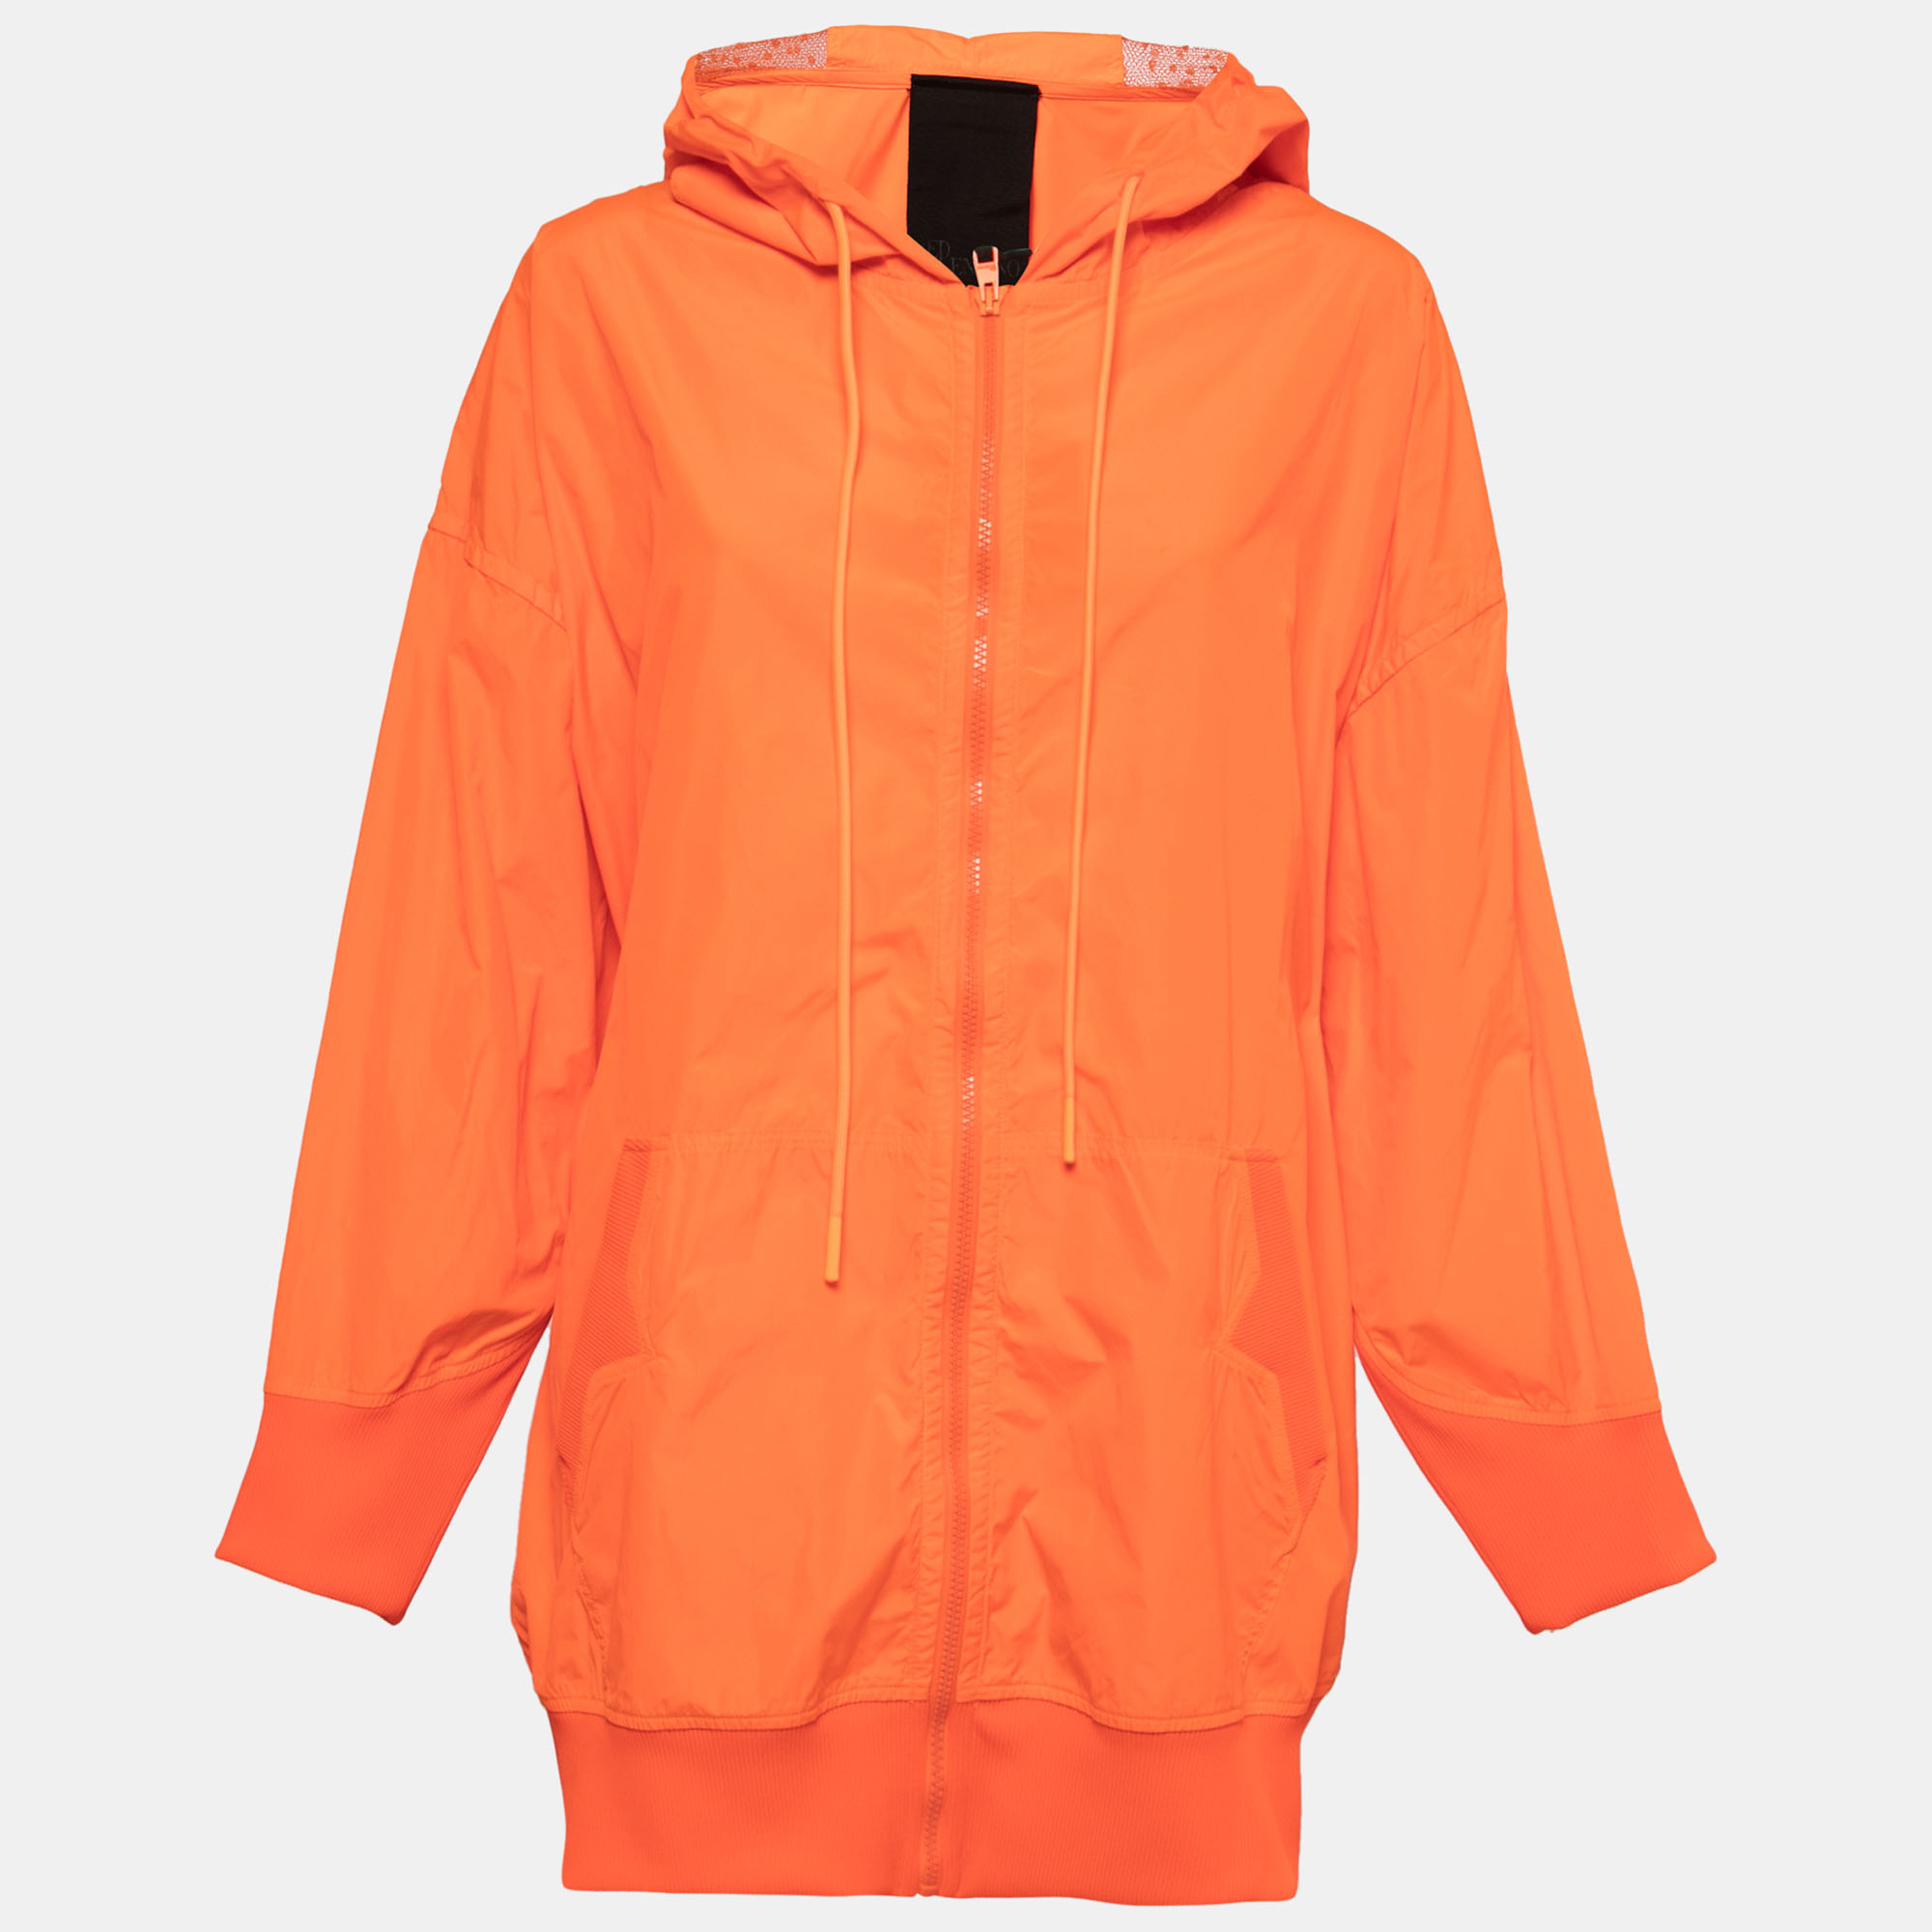 The RED Valentino Neon Orange Taffeta Zip Front Hooded Coat is a vibrant and stylish outerwear piece. Made from taffeta fabric it features a zip front closure and a hood for added functionality. With its eye catching neon orange color this coat is sure to make a bold fashion statement while keeping you warm and fashionable.